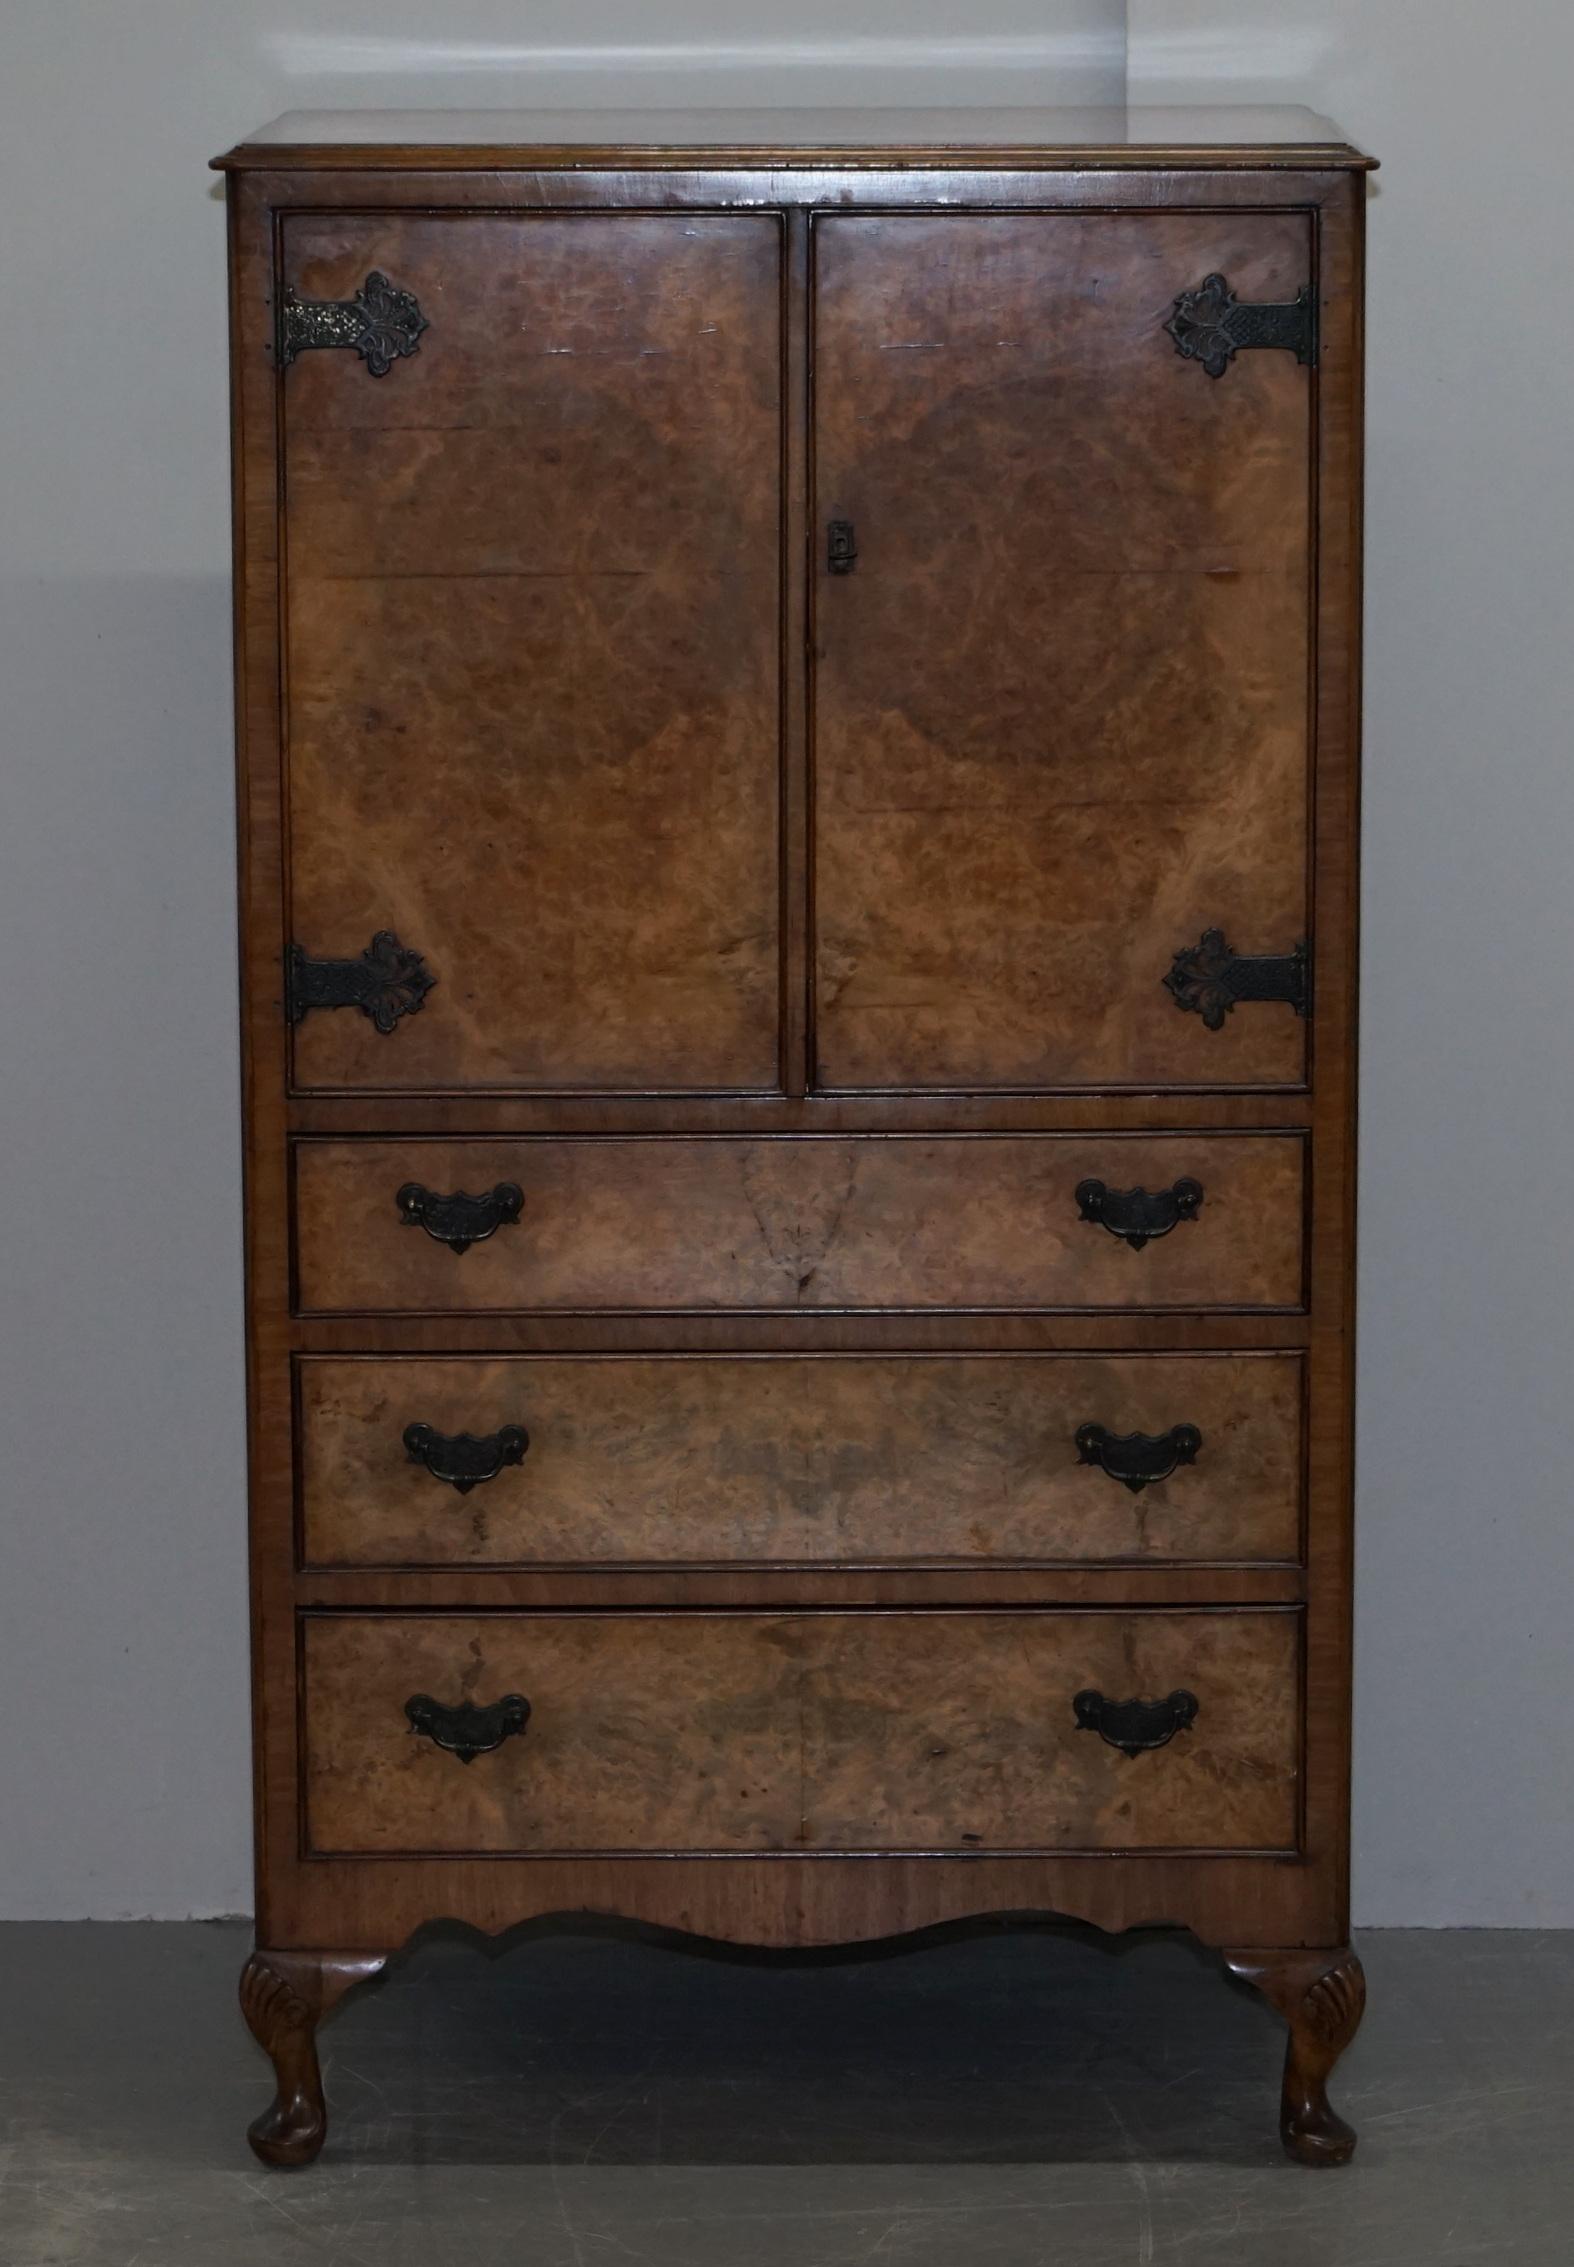 We are delighted to offer this lovely vintage circa 1920s Art Deco burr walnut drinks cabinet with drawers

This is a very well made and decorative piece, a perfect medium sized cupboard that sits well in any setting. The hinges and handles are